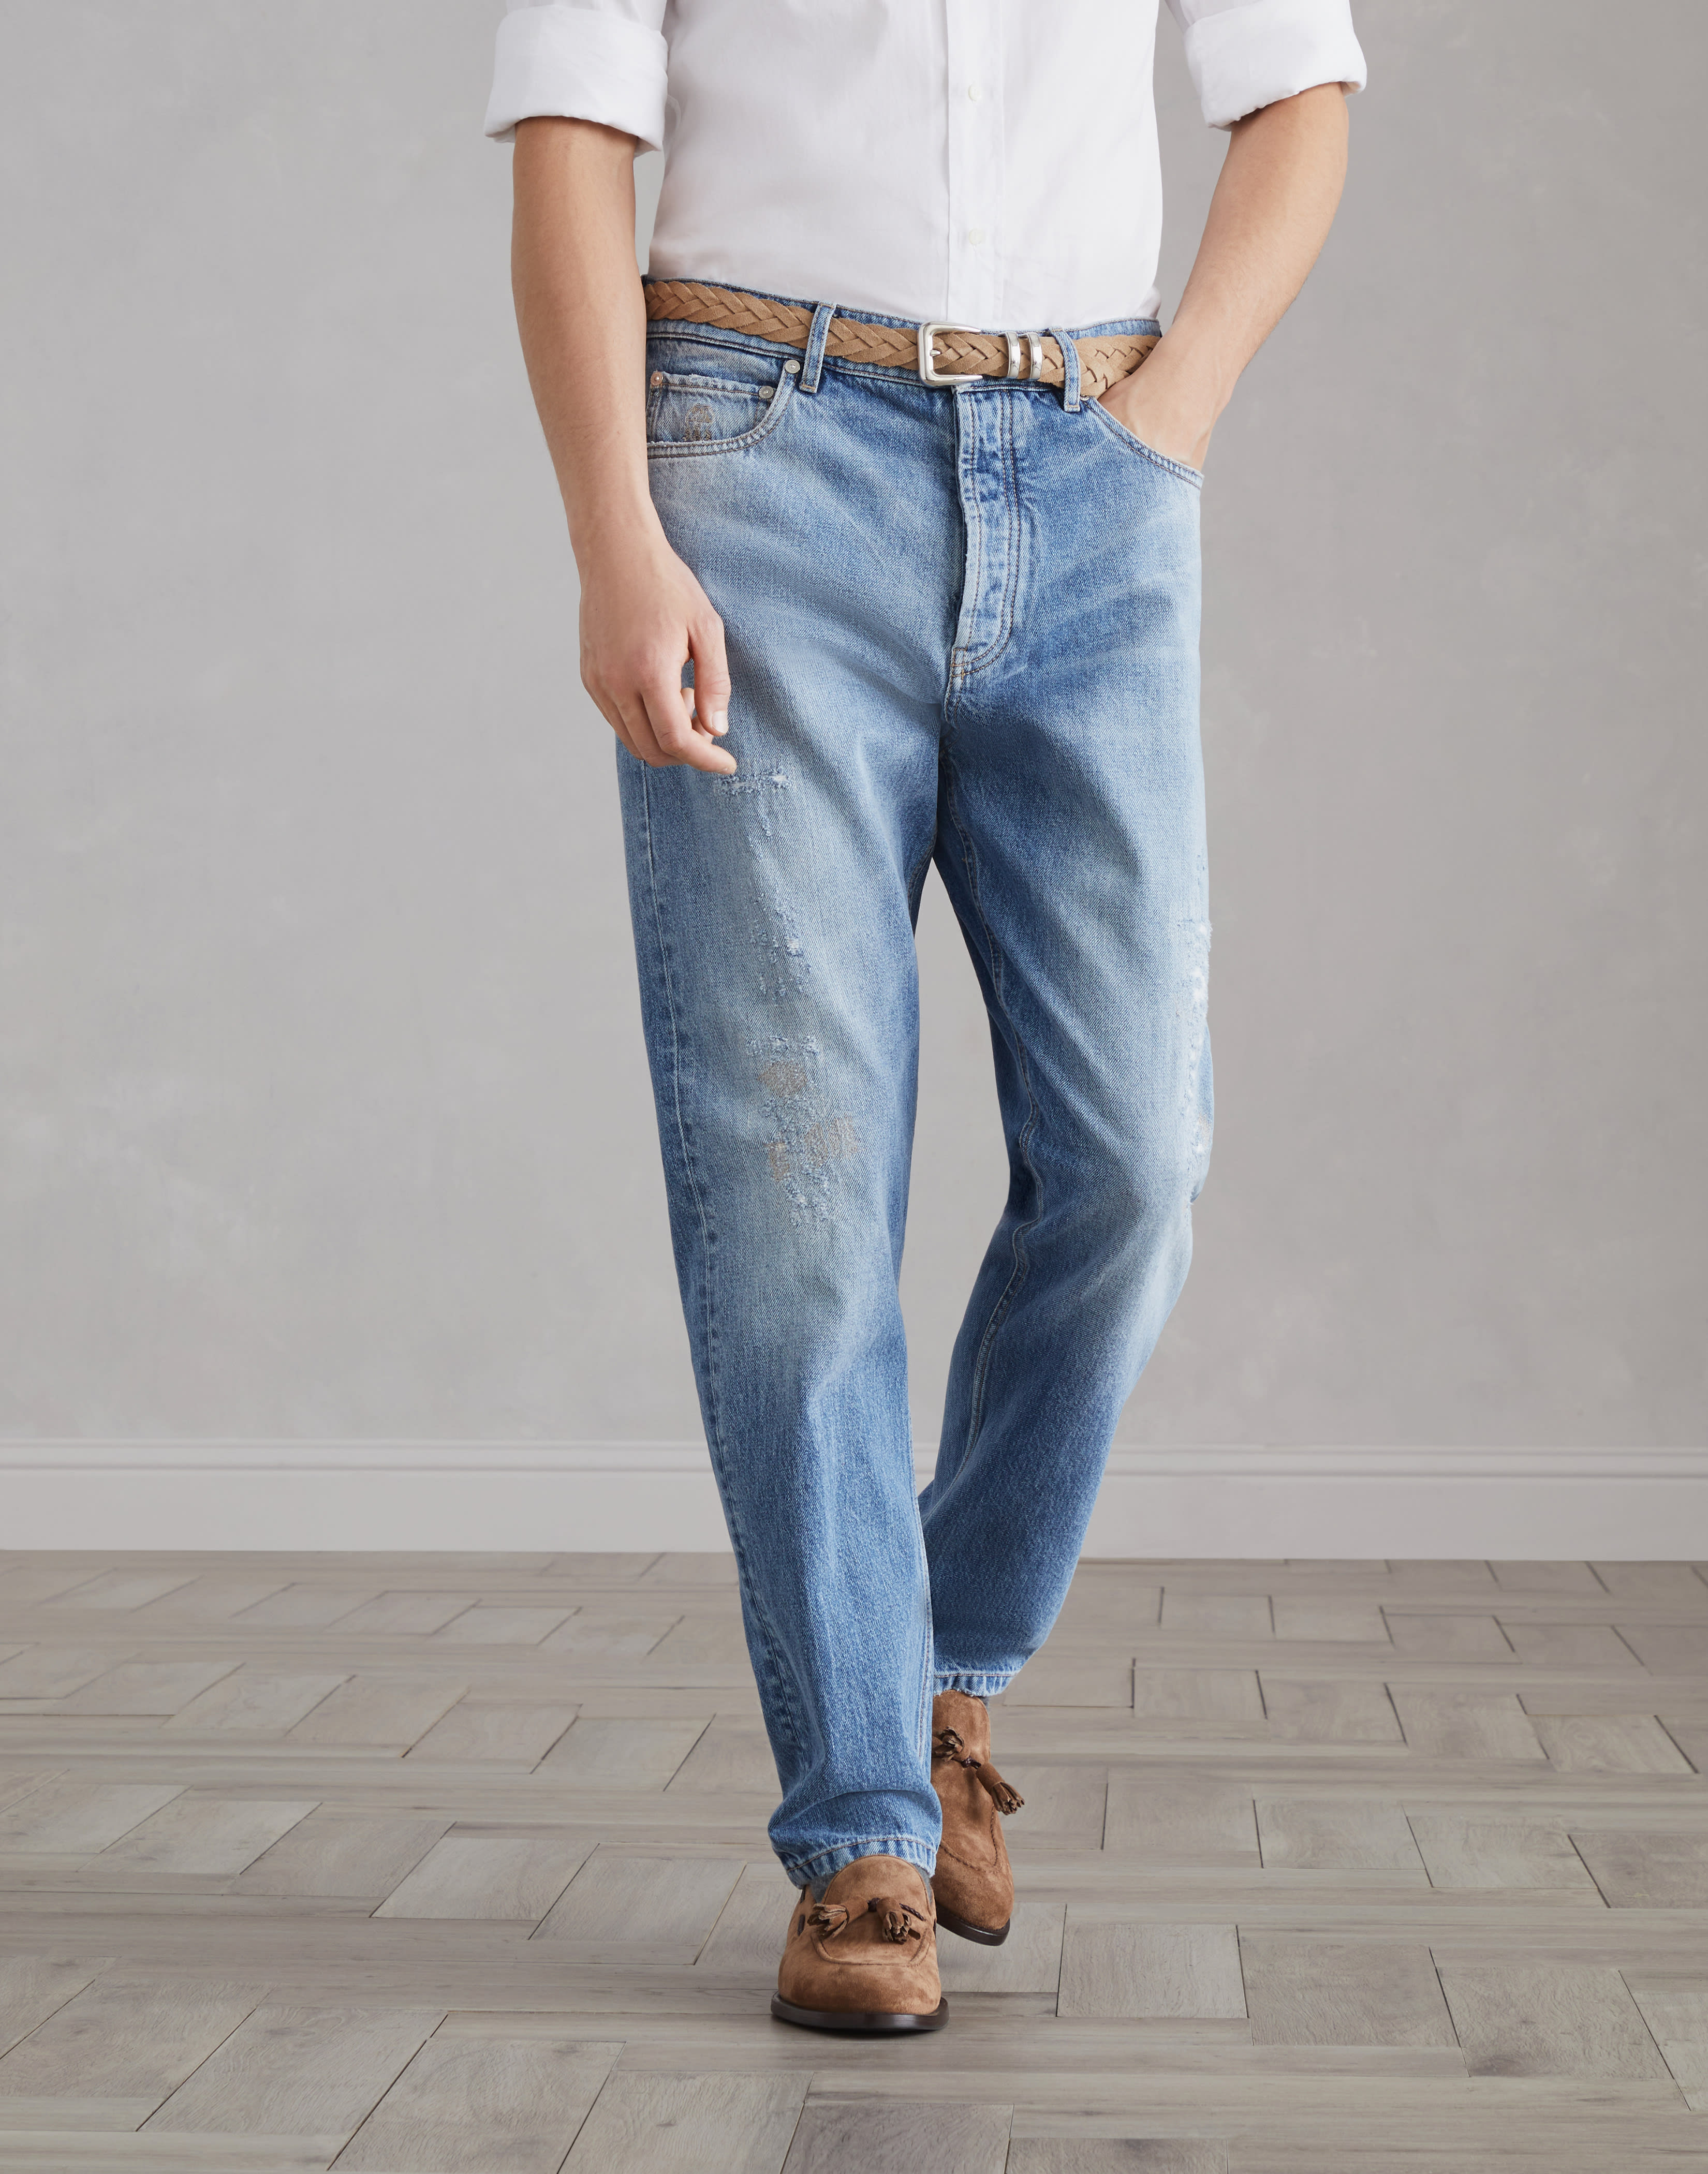 Denim trousers with rip details